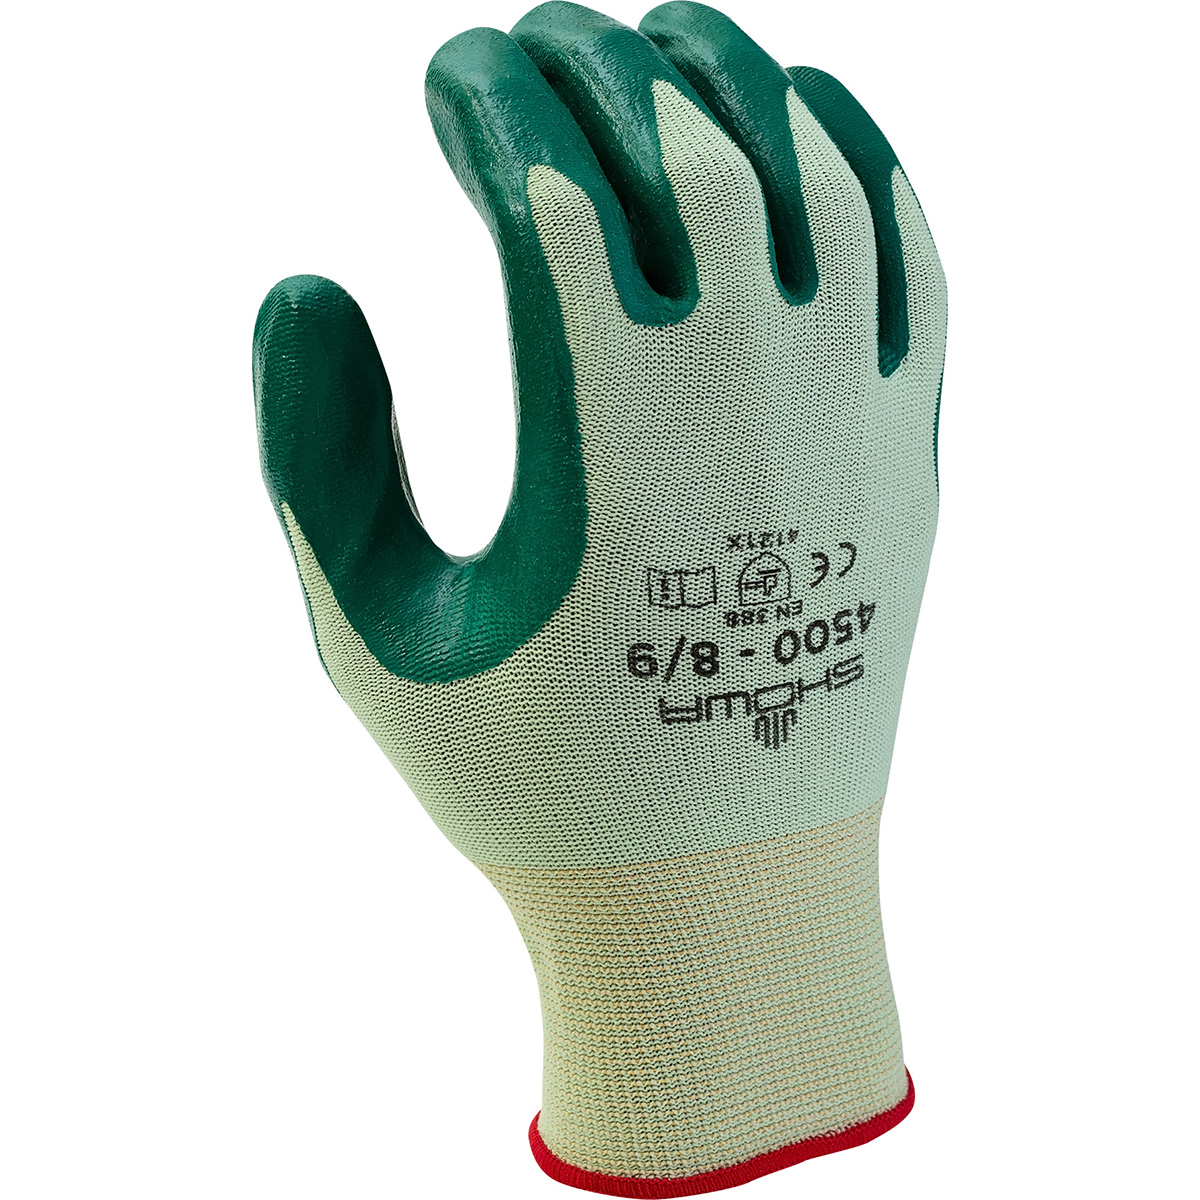 General purpose, nitrile-coated palm-dipped, light green w/green dip, nylon seamless shell, large